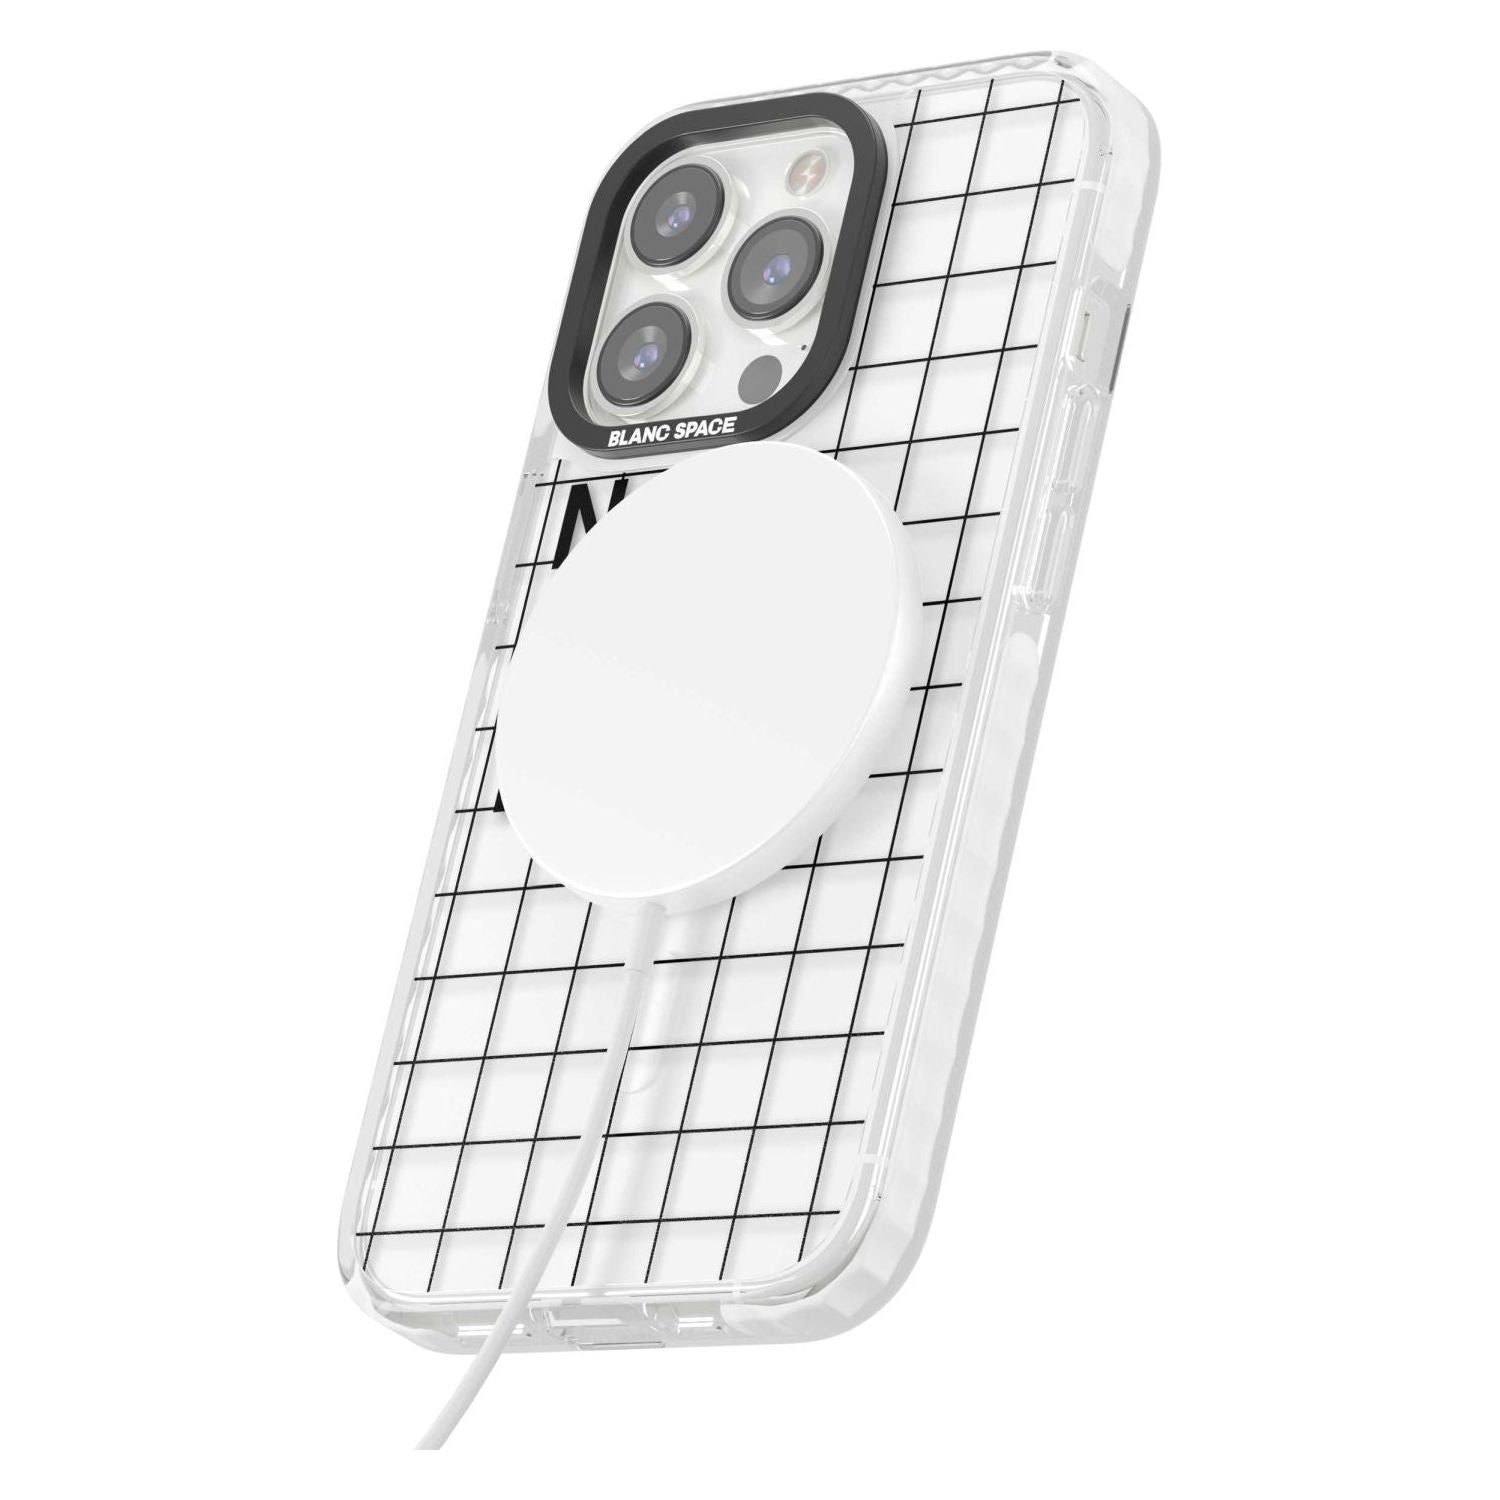 Grid Pattern Not Your Babe Phone Case iPhone 15 Pro Max / Black Impact Case,iPhone 15 Plus / Black Impact Case,iPhone 15 Pro / Black Impact Case,iPhone 15 / Black Impact Case,iPhone 15 Pro Max / Impact Case,iPhone 15 Plus / Impact Case,iPhone 15 Pro / Impact Case,iPhone 15 / Impact Case,iPhone 15 Pro Max / Magsafe Black Impact Case,iPhone 15 Plus / Magsafe Black Impact Case,iPhone 15 Pro / Magsafe Black Impact Case,iPhone 15 / Magsafe Black Impact Case,iPhone 14 Pro Max / Black Impact Case,iPhone 14 Plus / 